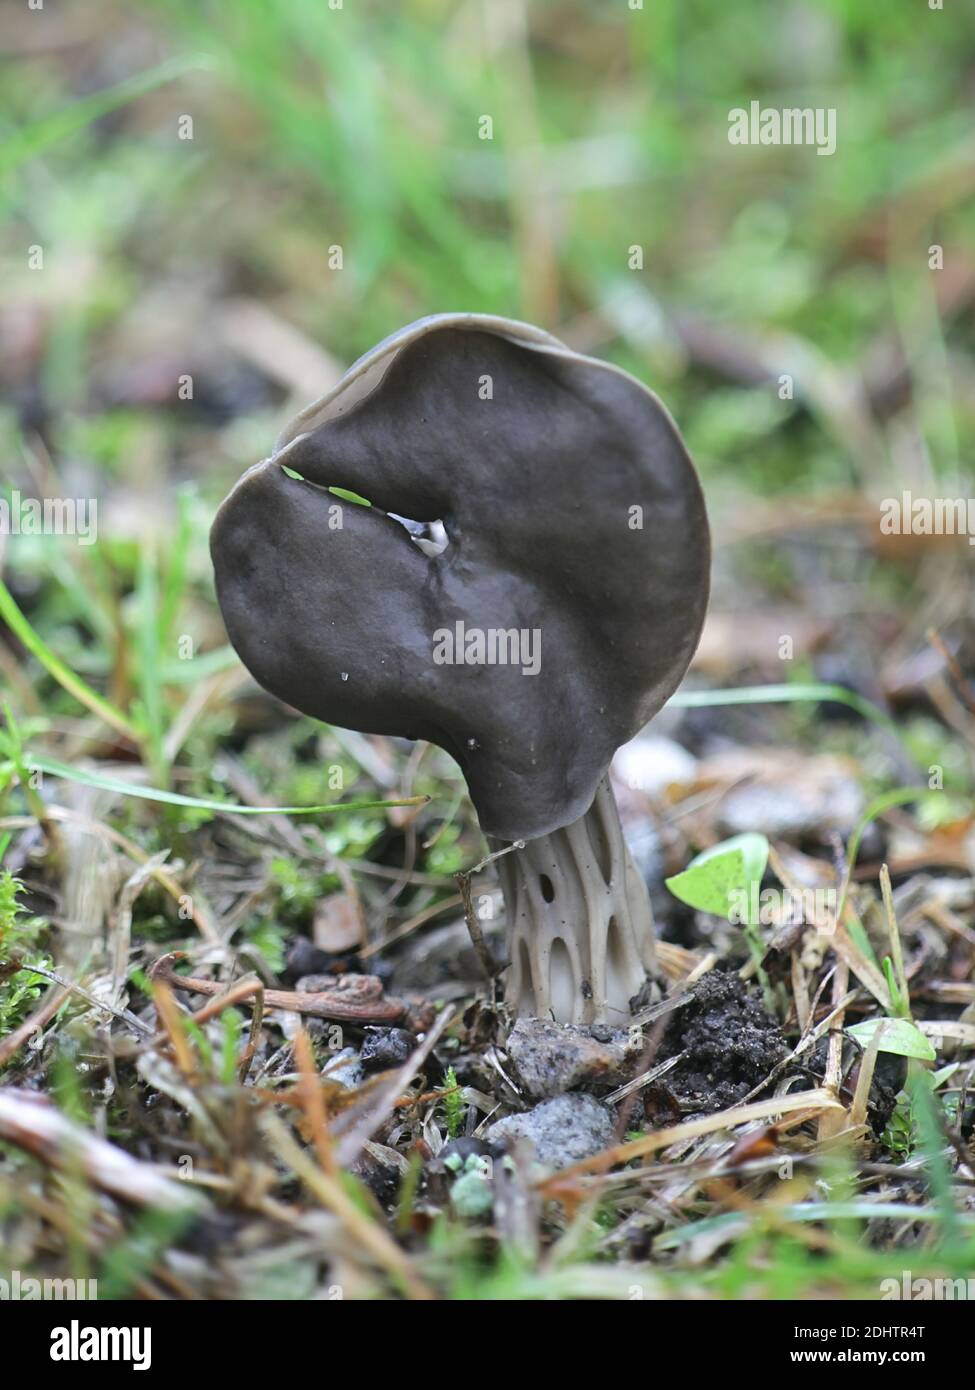 Slate grey saddle, Helvella lacunosa, known also as fluted black elfin saddle, wild mushrooms from Finland Stock Photo